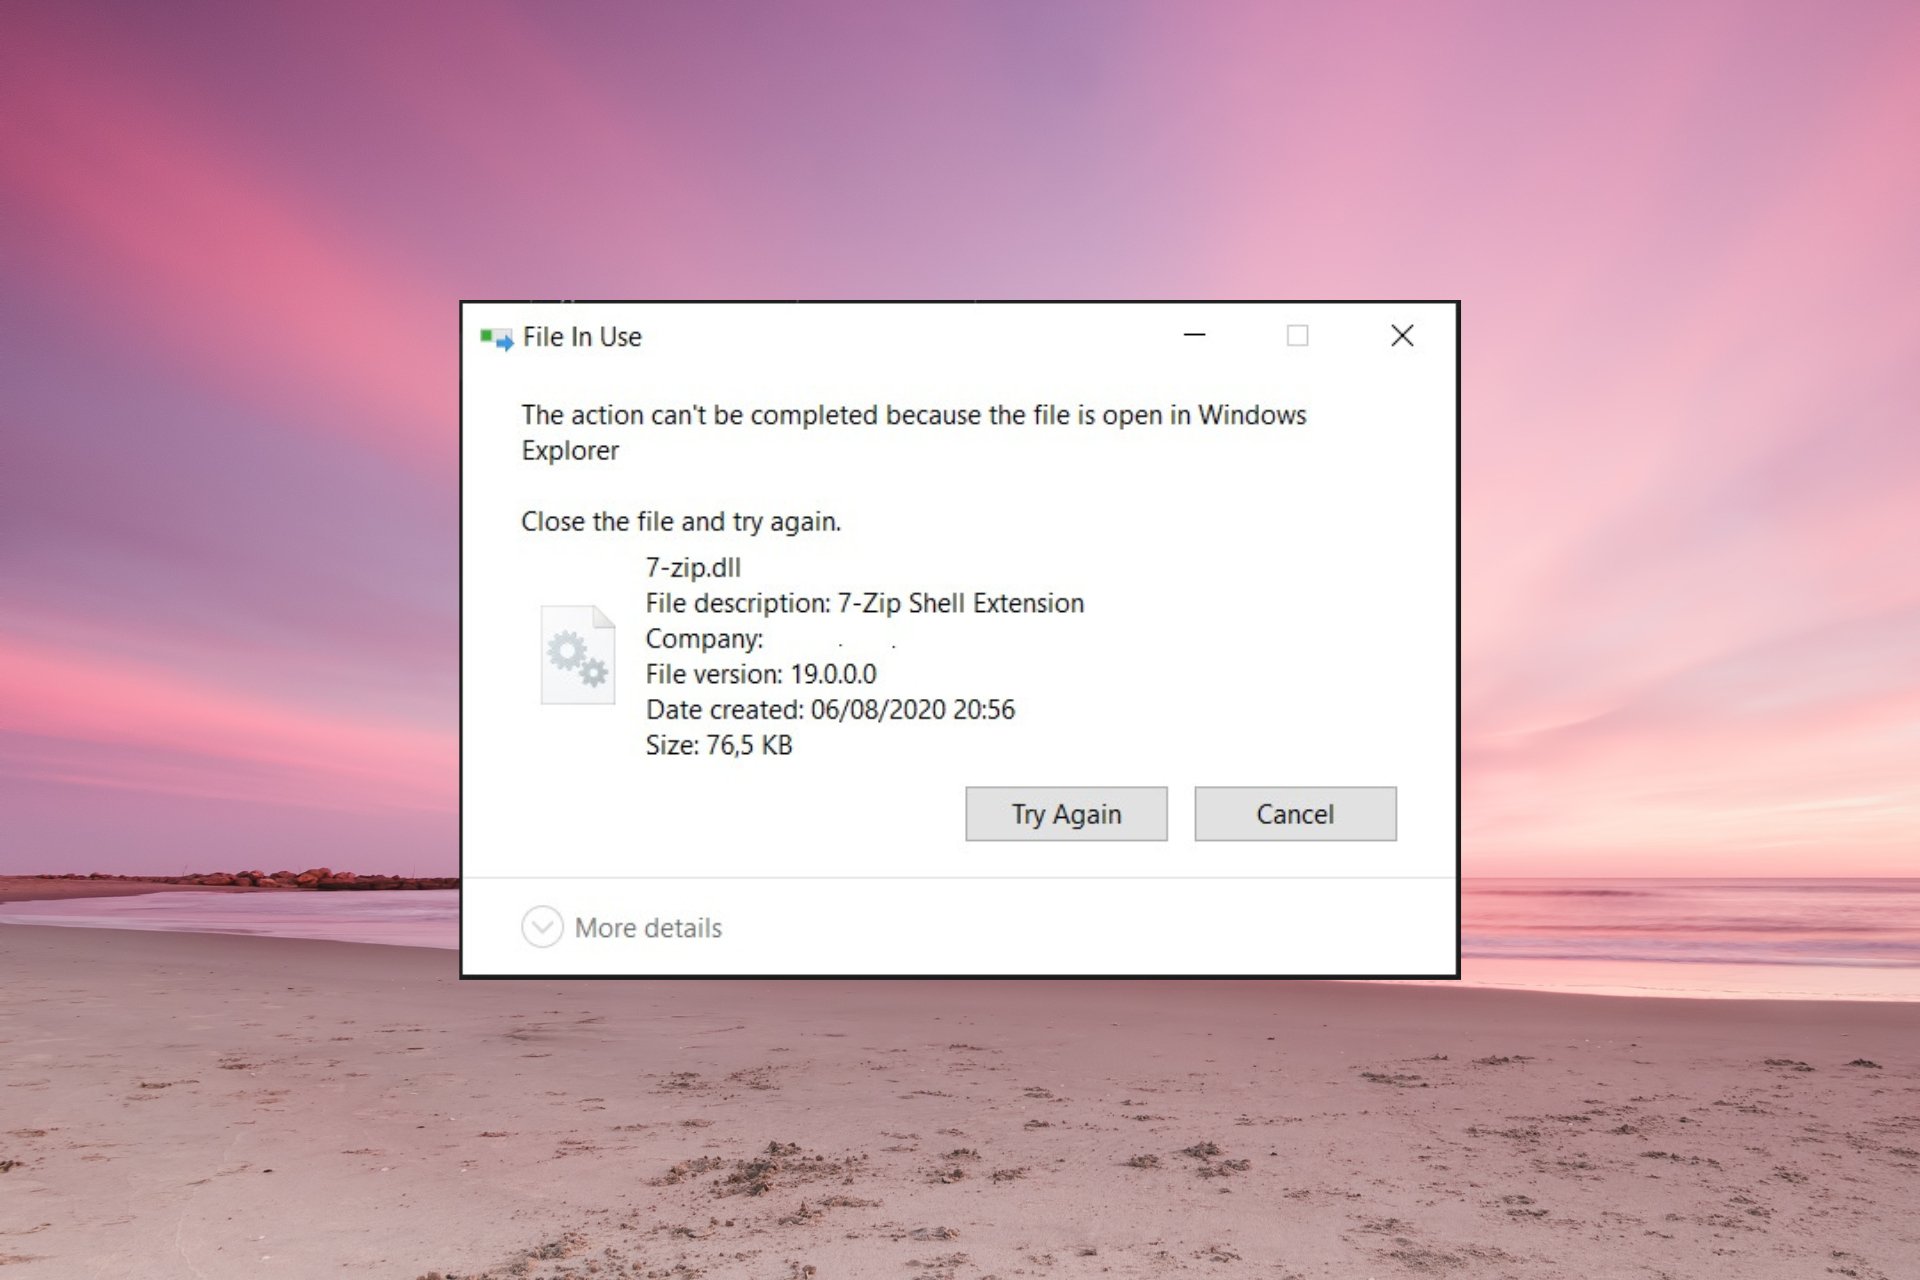 How to get rid of 7-zip.dll